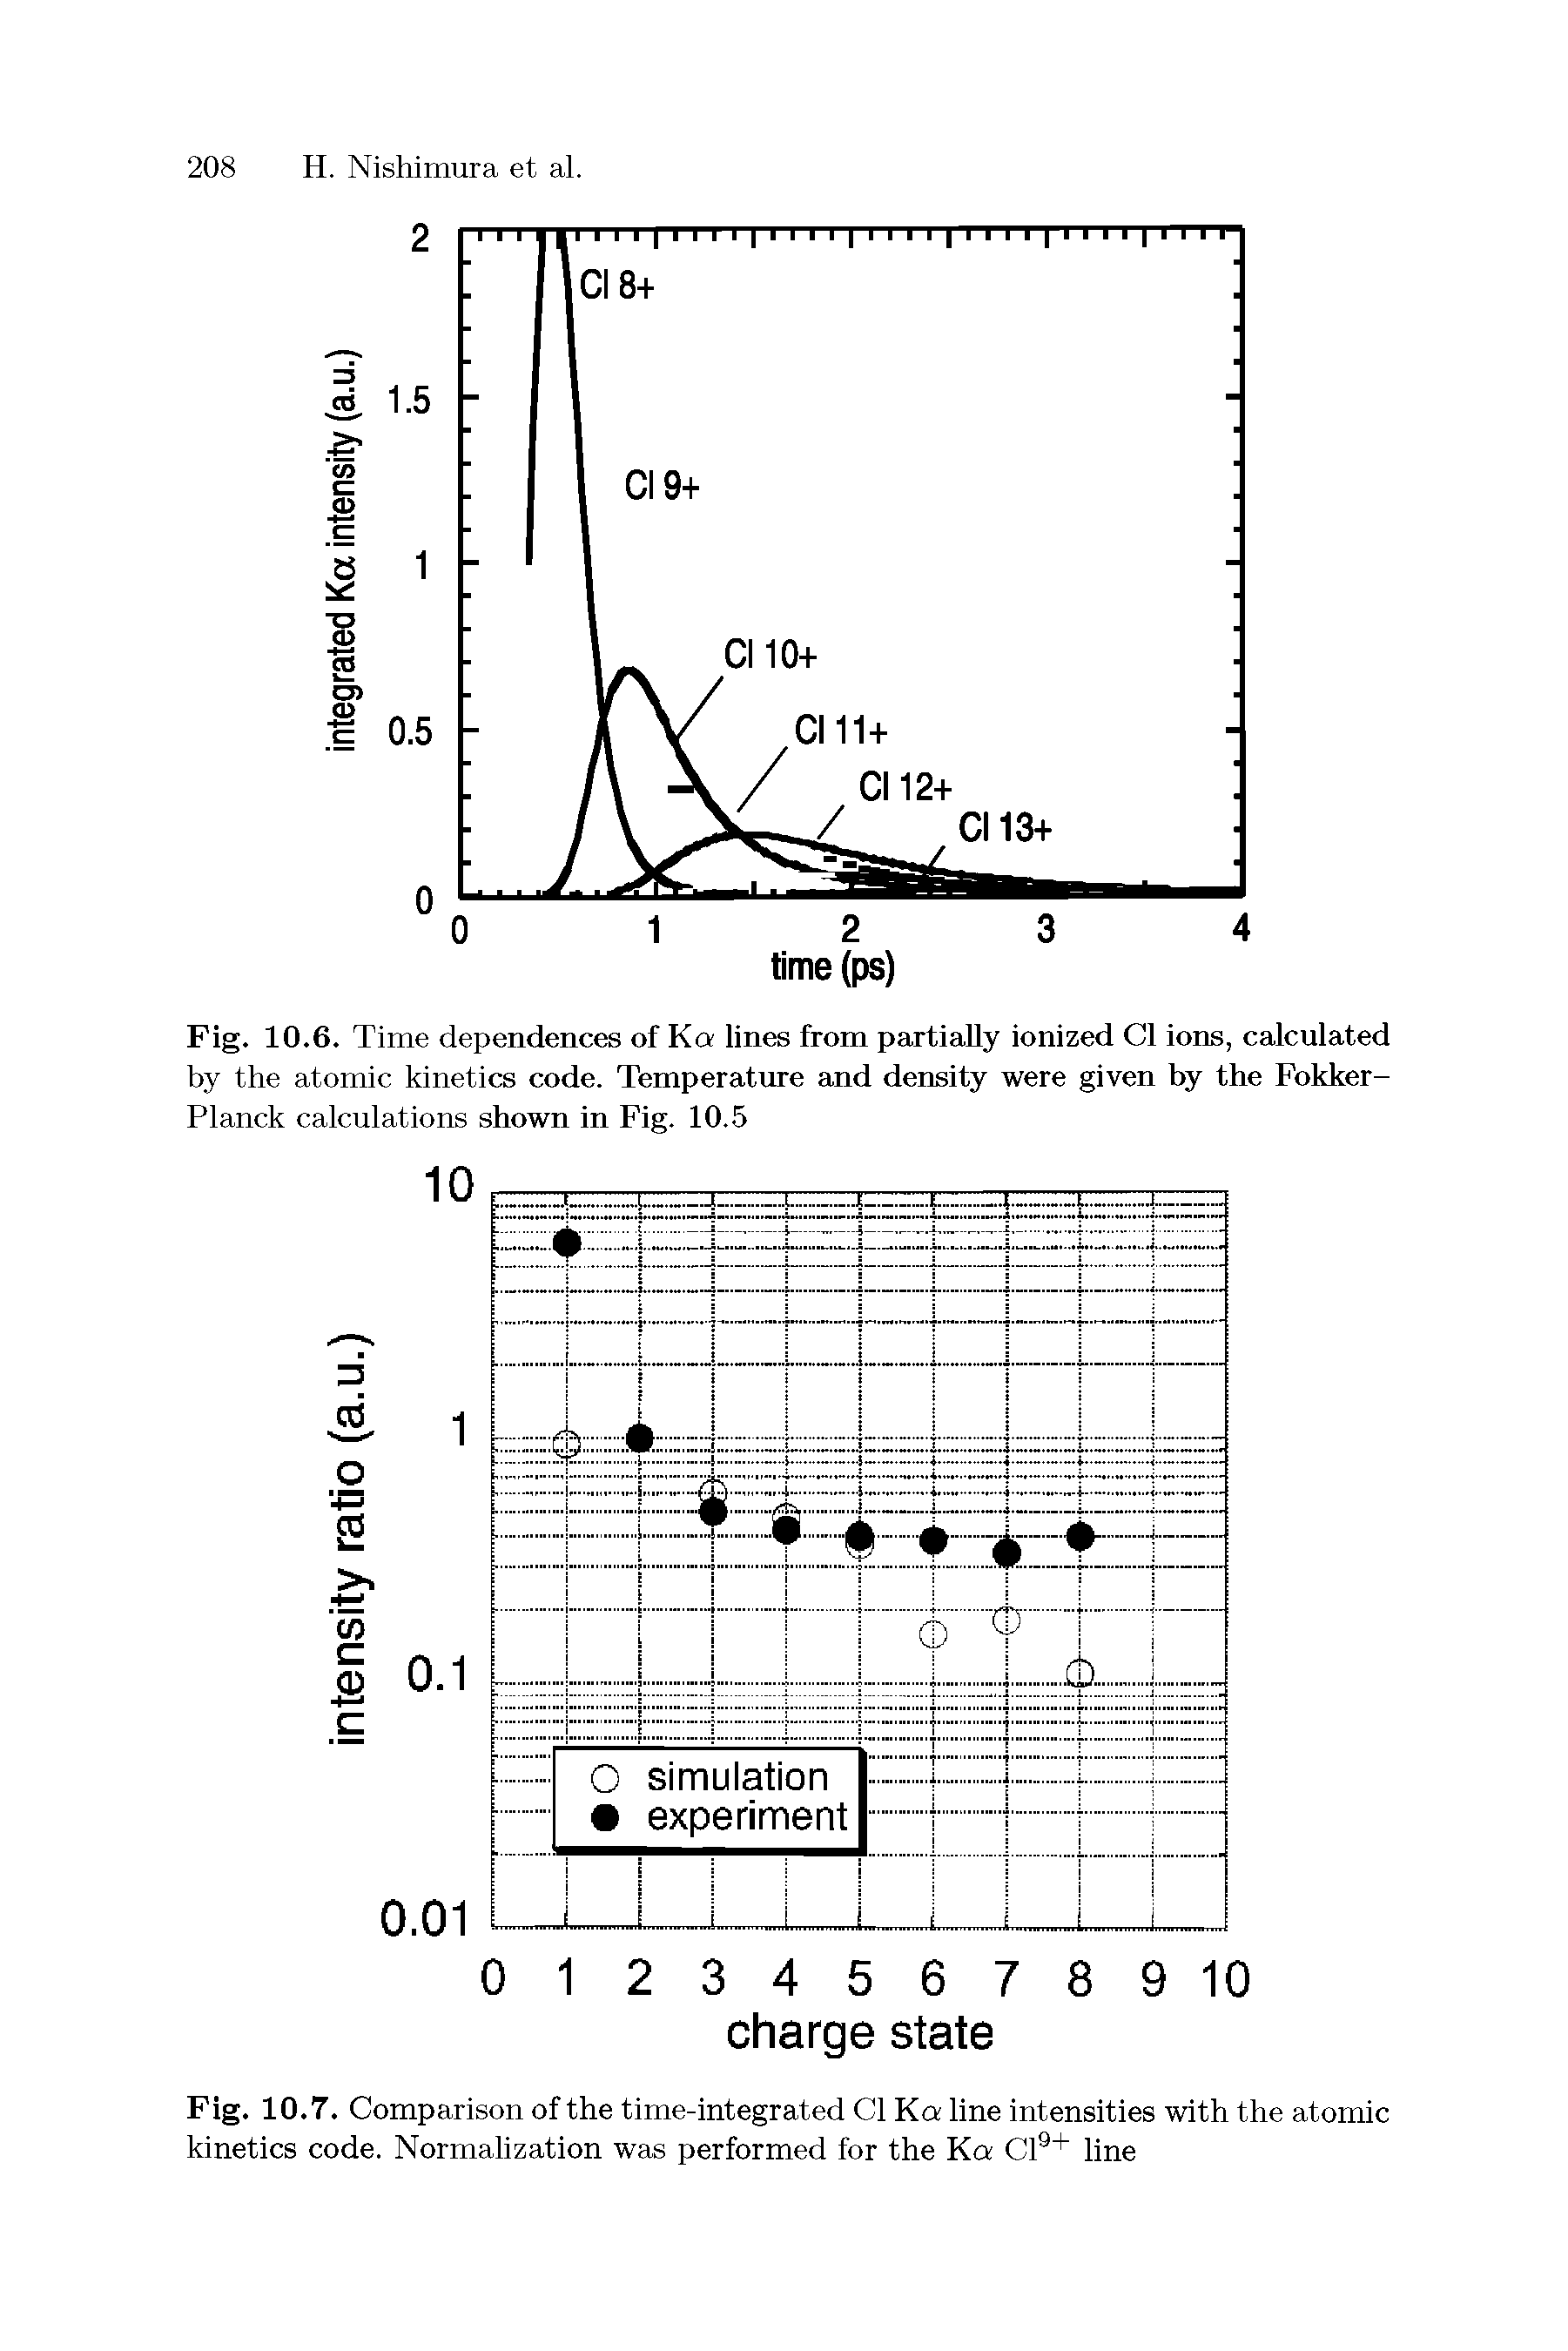 Fig. 10.6. Time dependences of K lines from partially ionized Cl ions, calculated by the atomic kinetics code. Temperature and density were given by the Fokker-Planck calculations shown in Fig. 10.5...